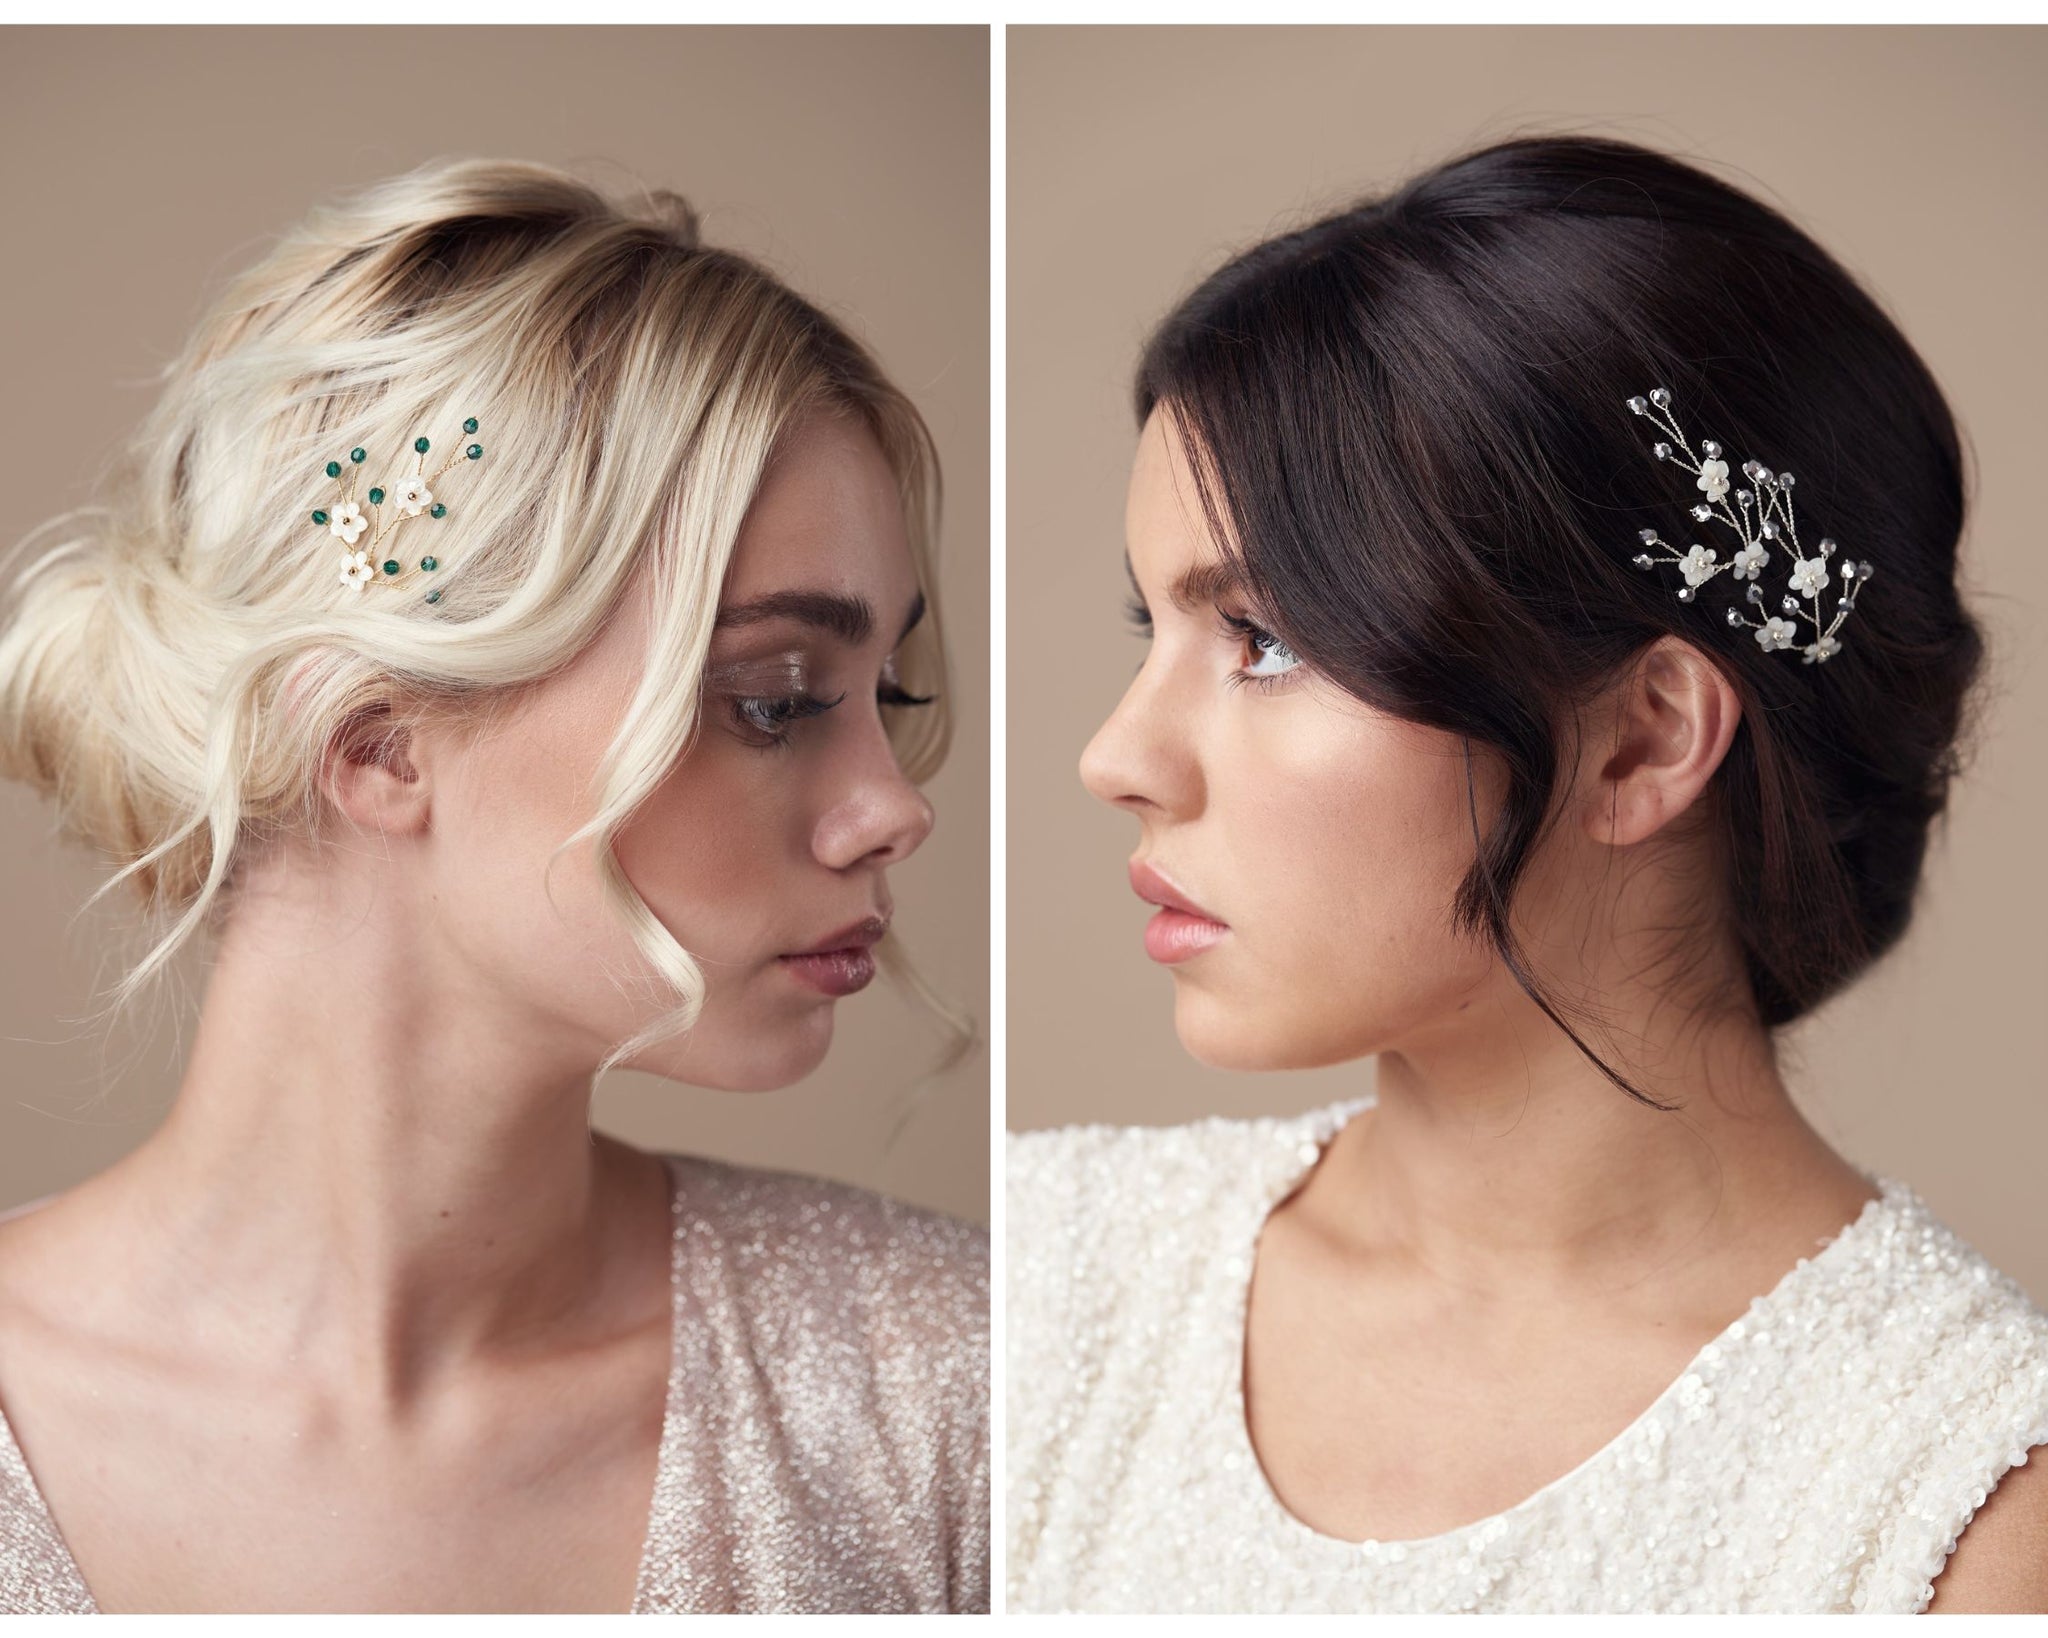 Two flower hairpins made of carved mother of pearl flowers and crystals - in champagne and also in silver tones